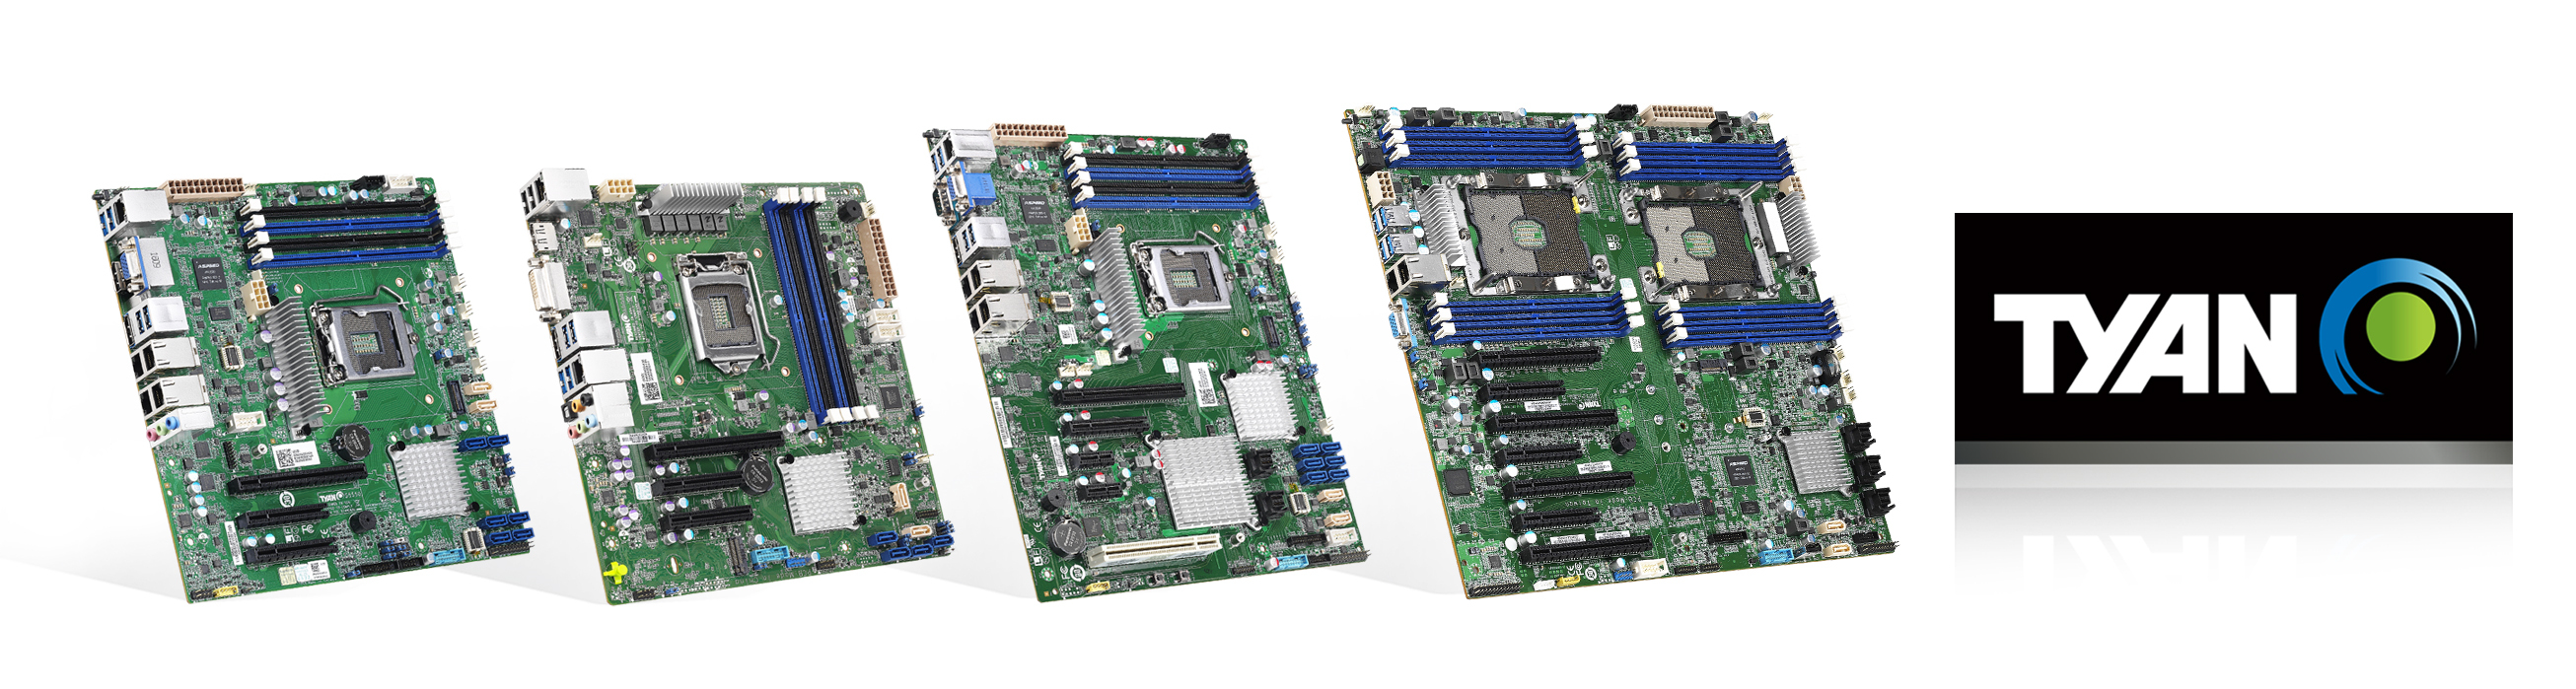 geeuwen Verbeteren overhemd TYAN Shows Embedded Server Motherboards to Offer Industry-Leading  Performance at Embedded World 2019 | Business Wire